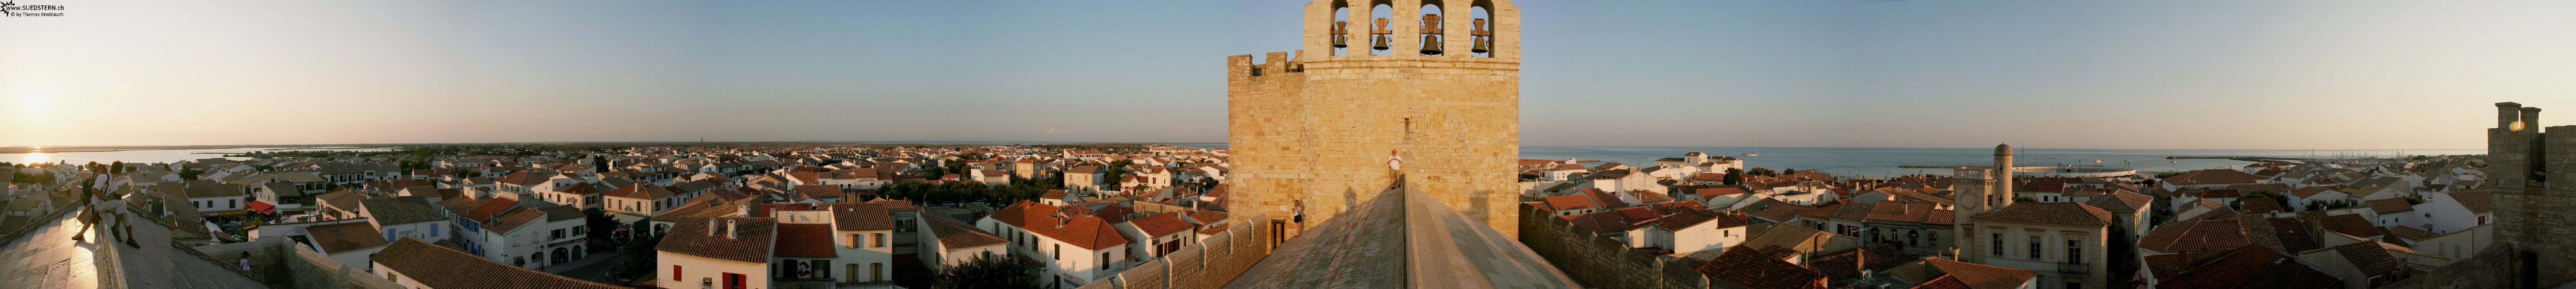 2008-08-28 - Panorama on the rooftop of church in st. maries de la mer, france